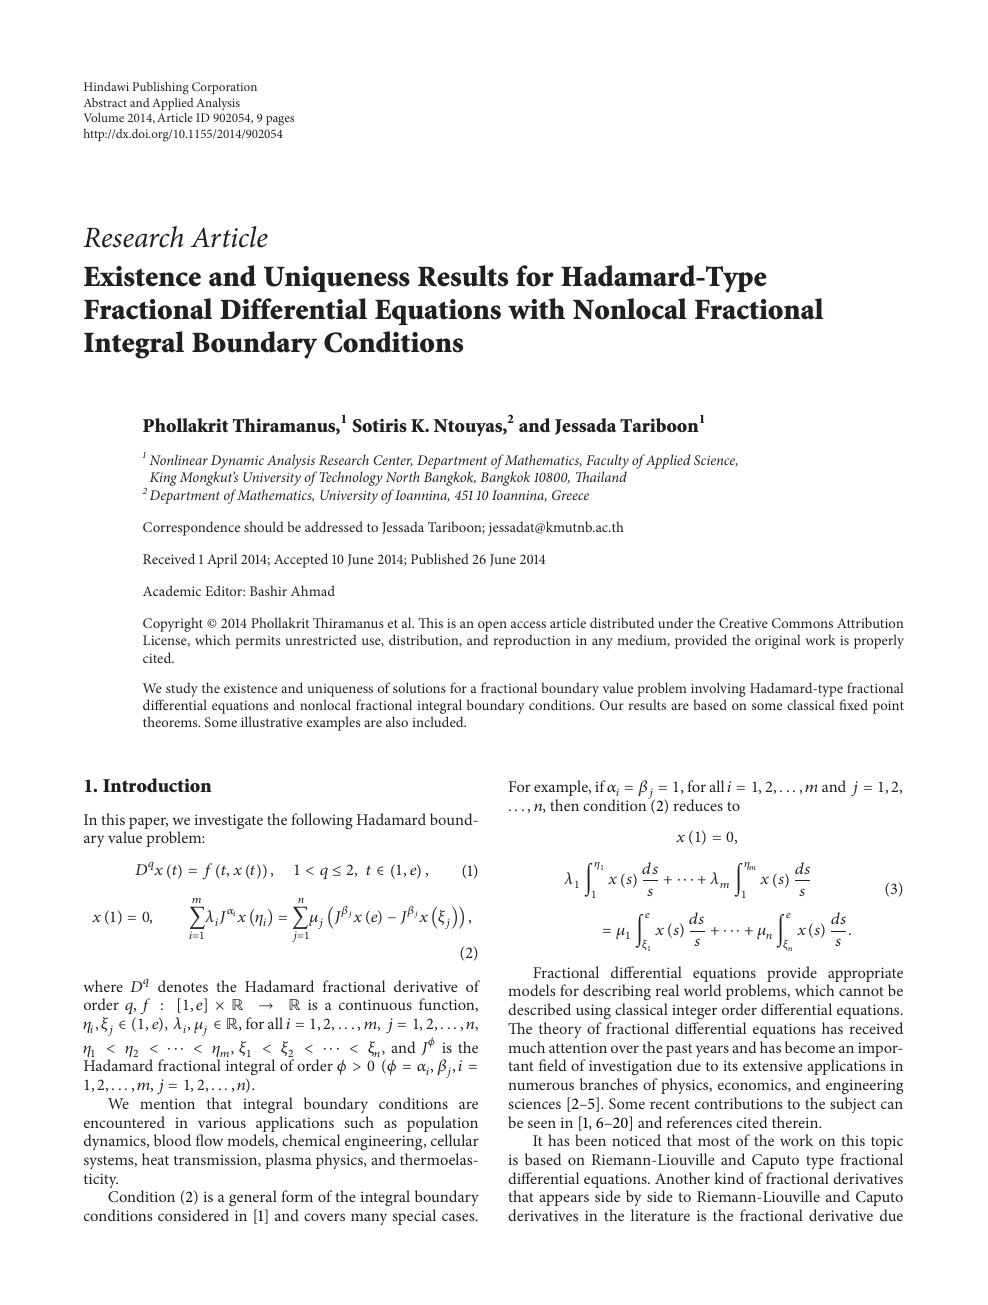 Existence And Uniqueness Results For Hadamard Type Fractional Differential Equations With Nonlocal Fractional Integral Boundary Conditions Topic Of Research Paper In Mathematics Download Scholarly Article Pdf And Read For Free On Cyberleninka